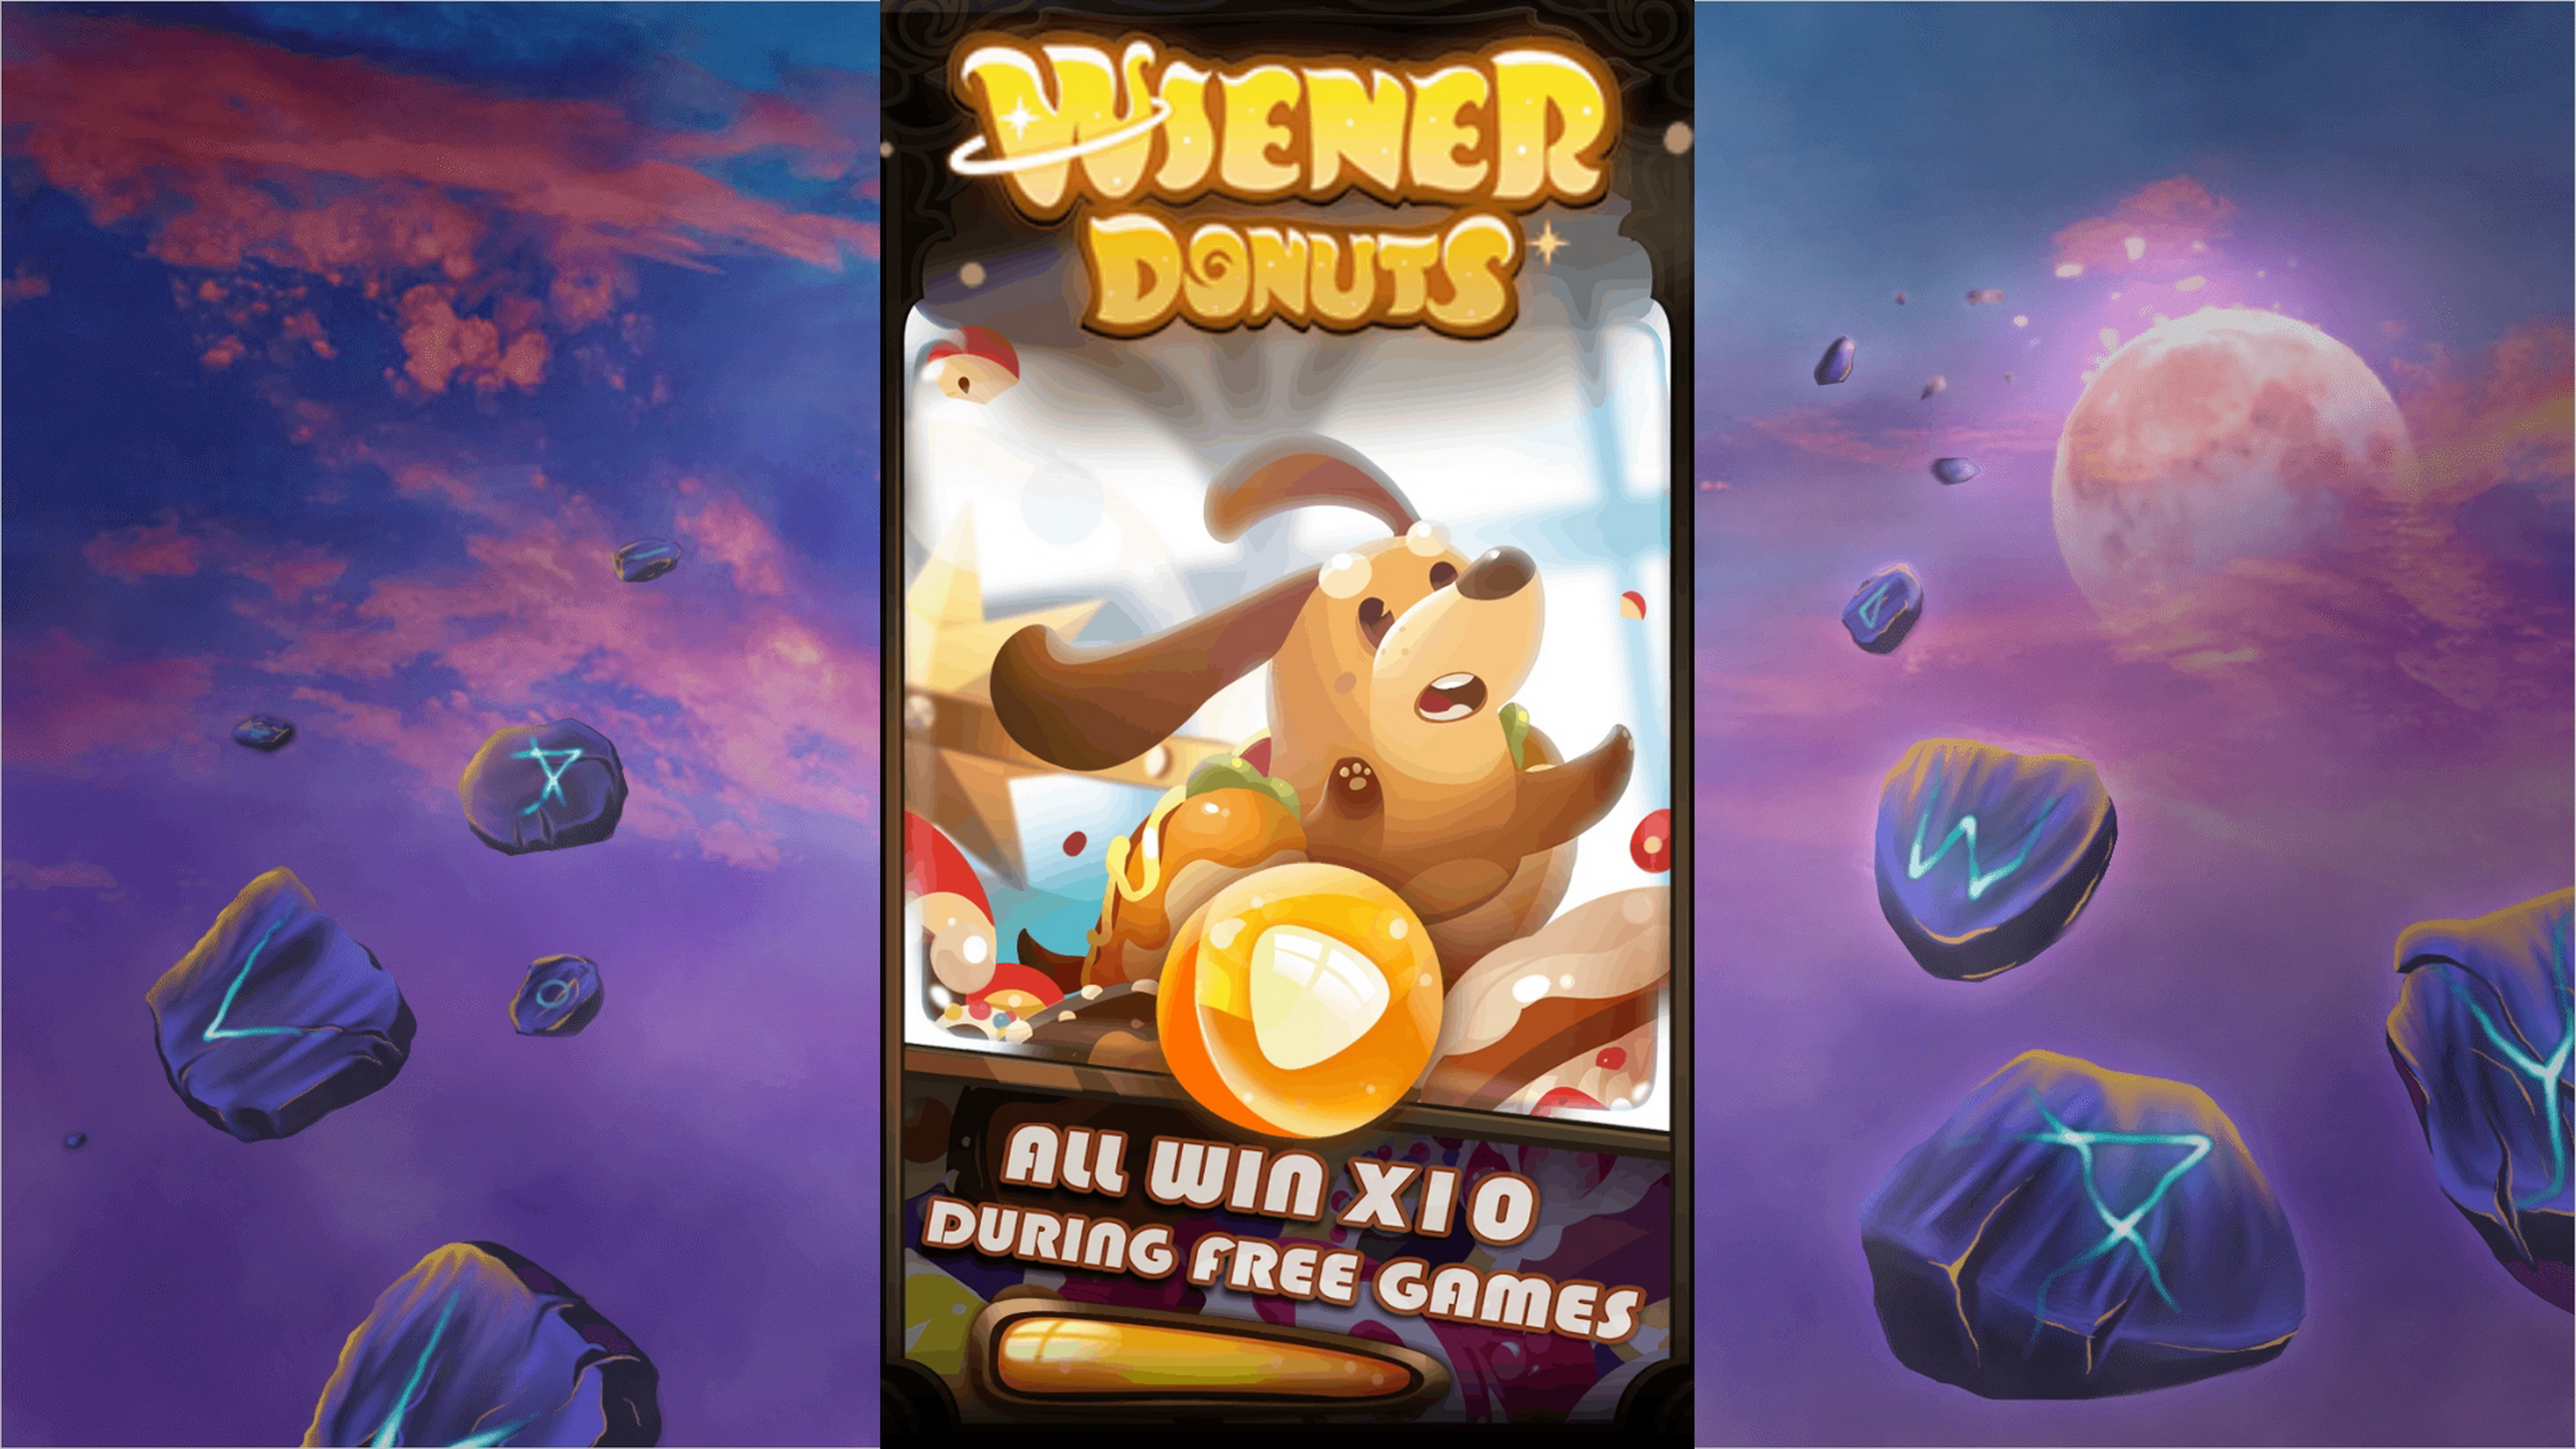 Play Wiener Donuts Free Casino Slot Game by AllWaySpin